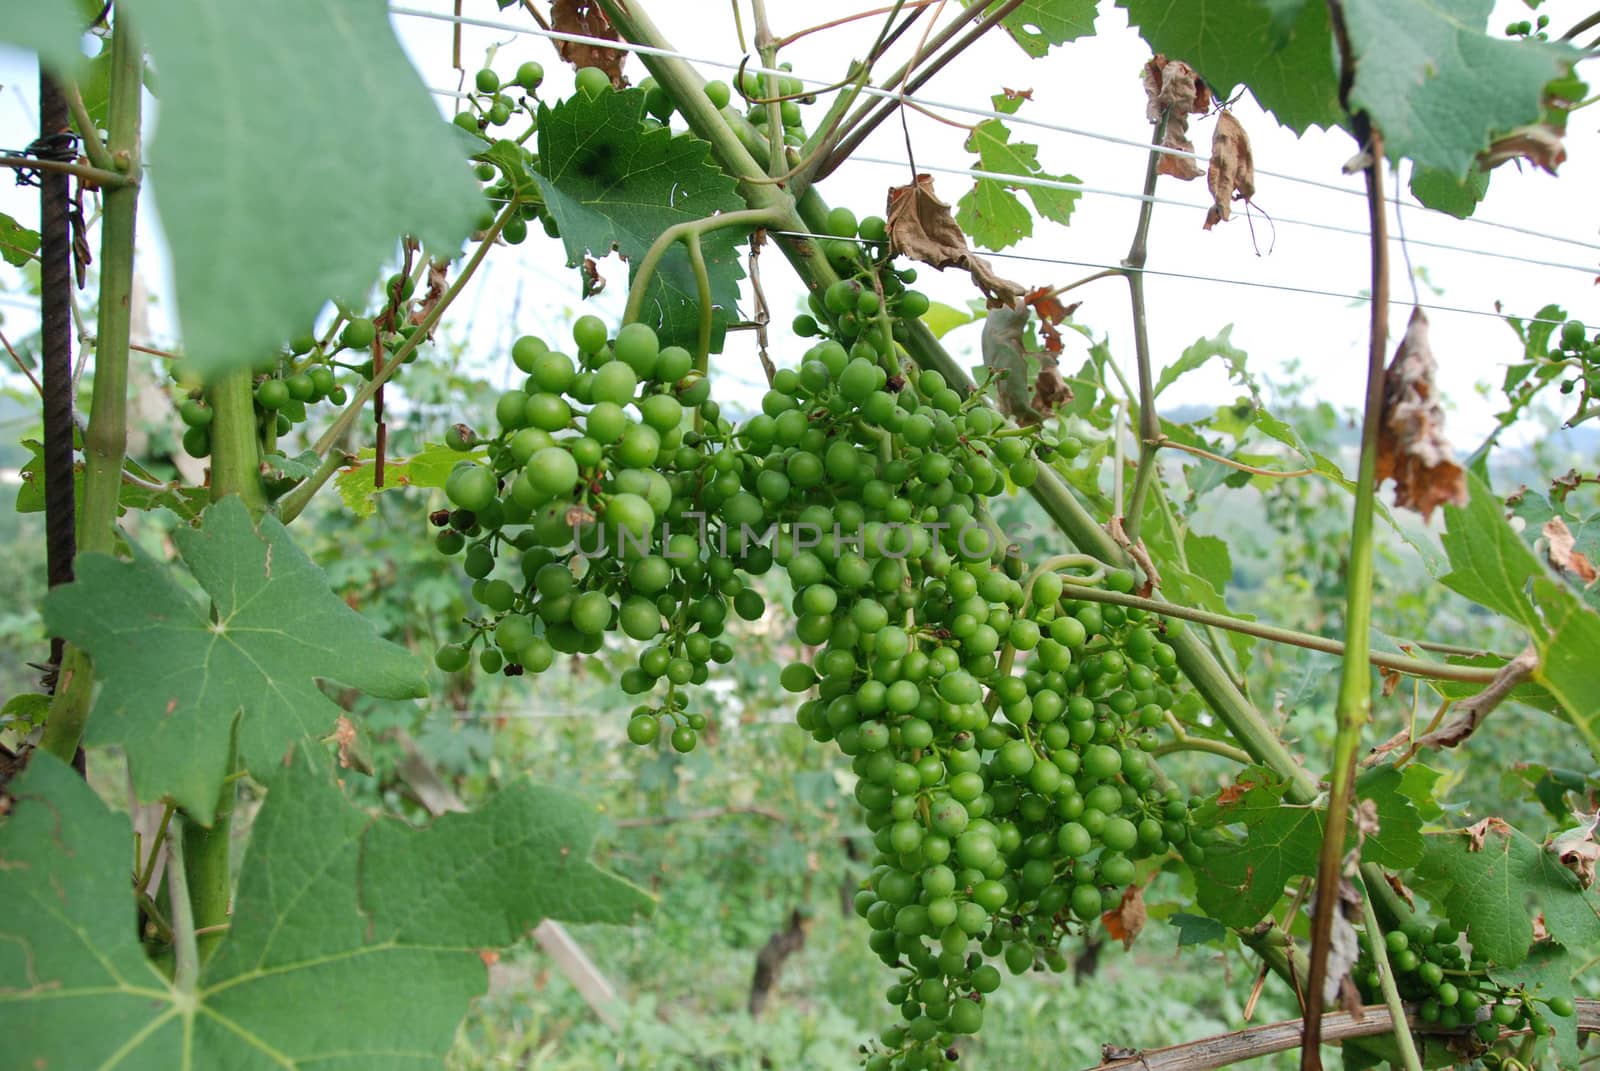 Nebbiolo grapes in Langhe vineyards, Piedmont - Italy